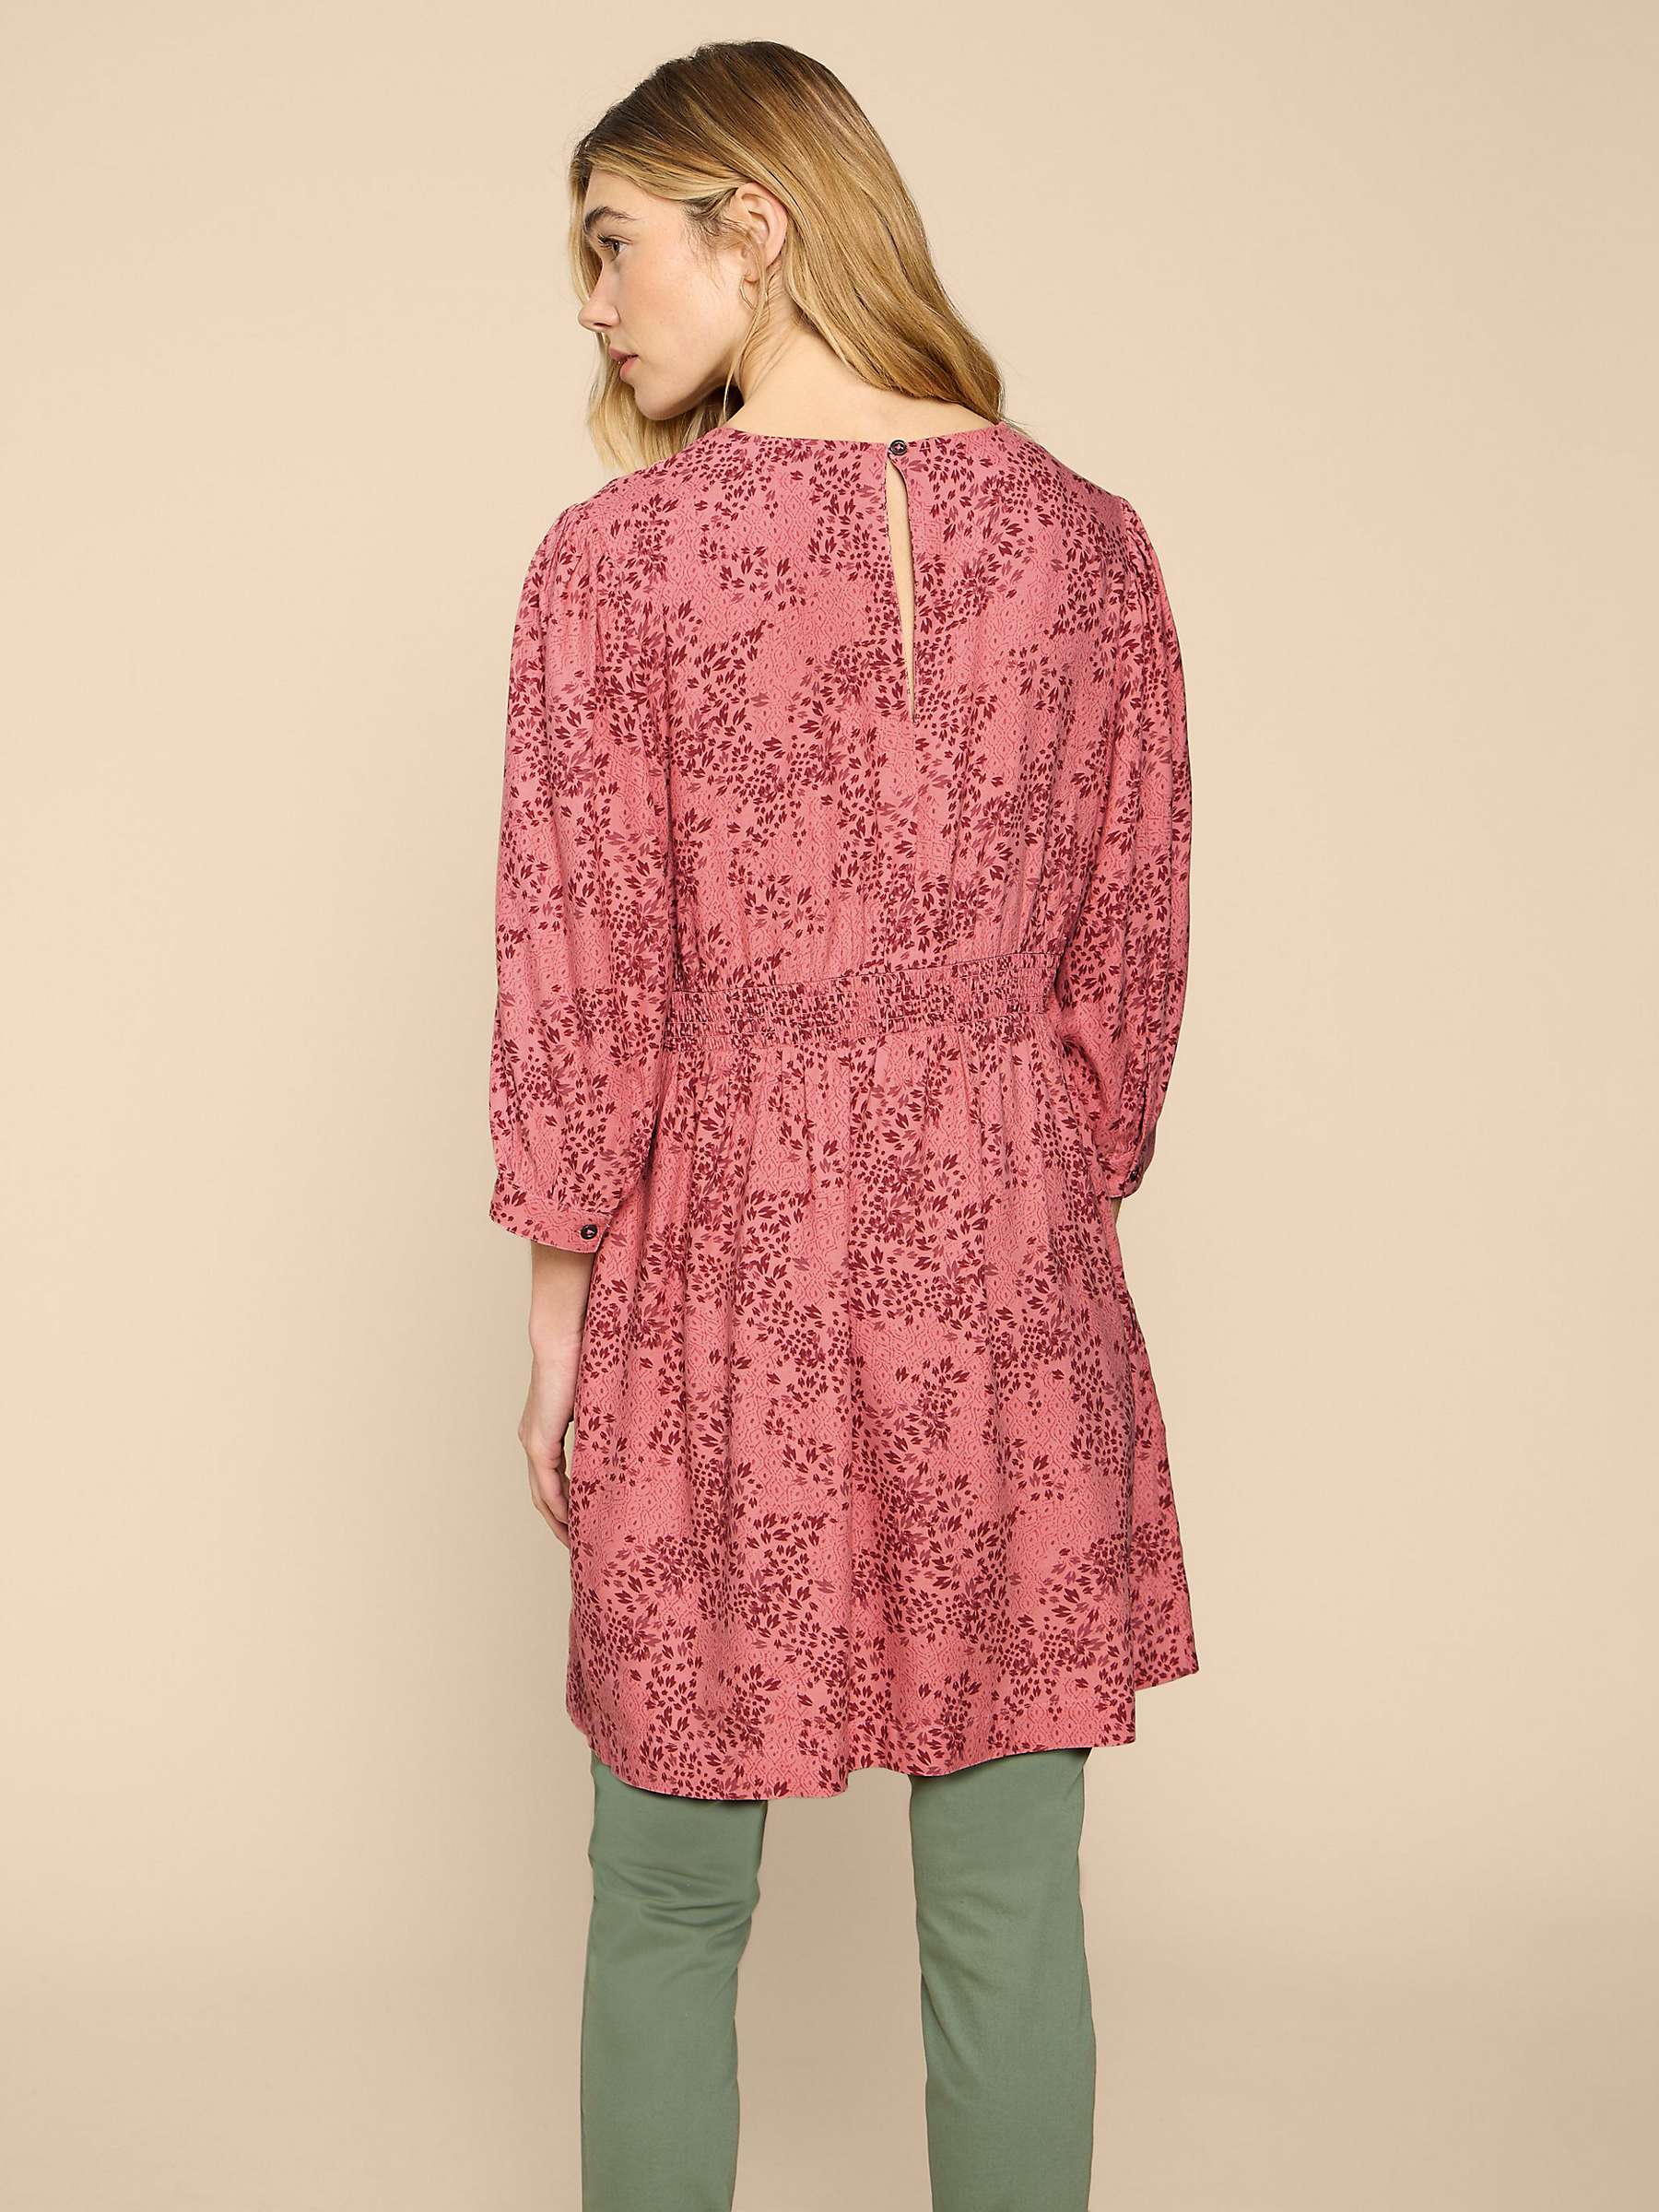 Buy White Stuff Lucy Ecovero Tunic, Pink/Multi Online at johnlewis.com